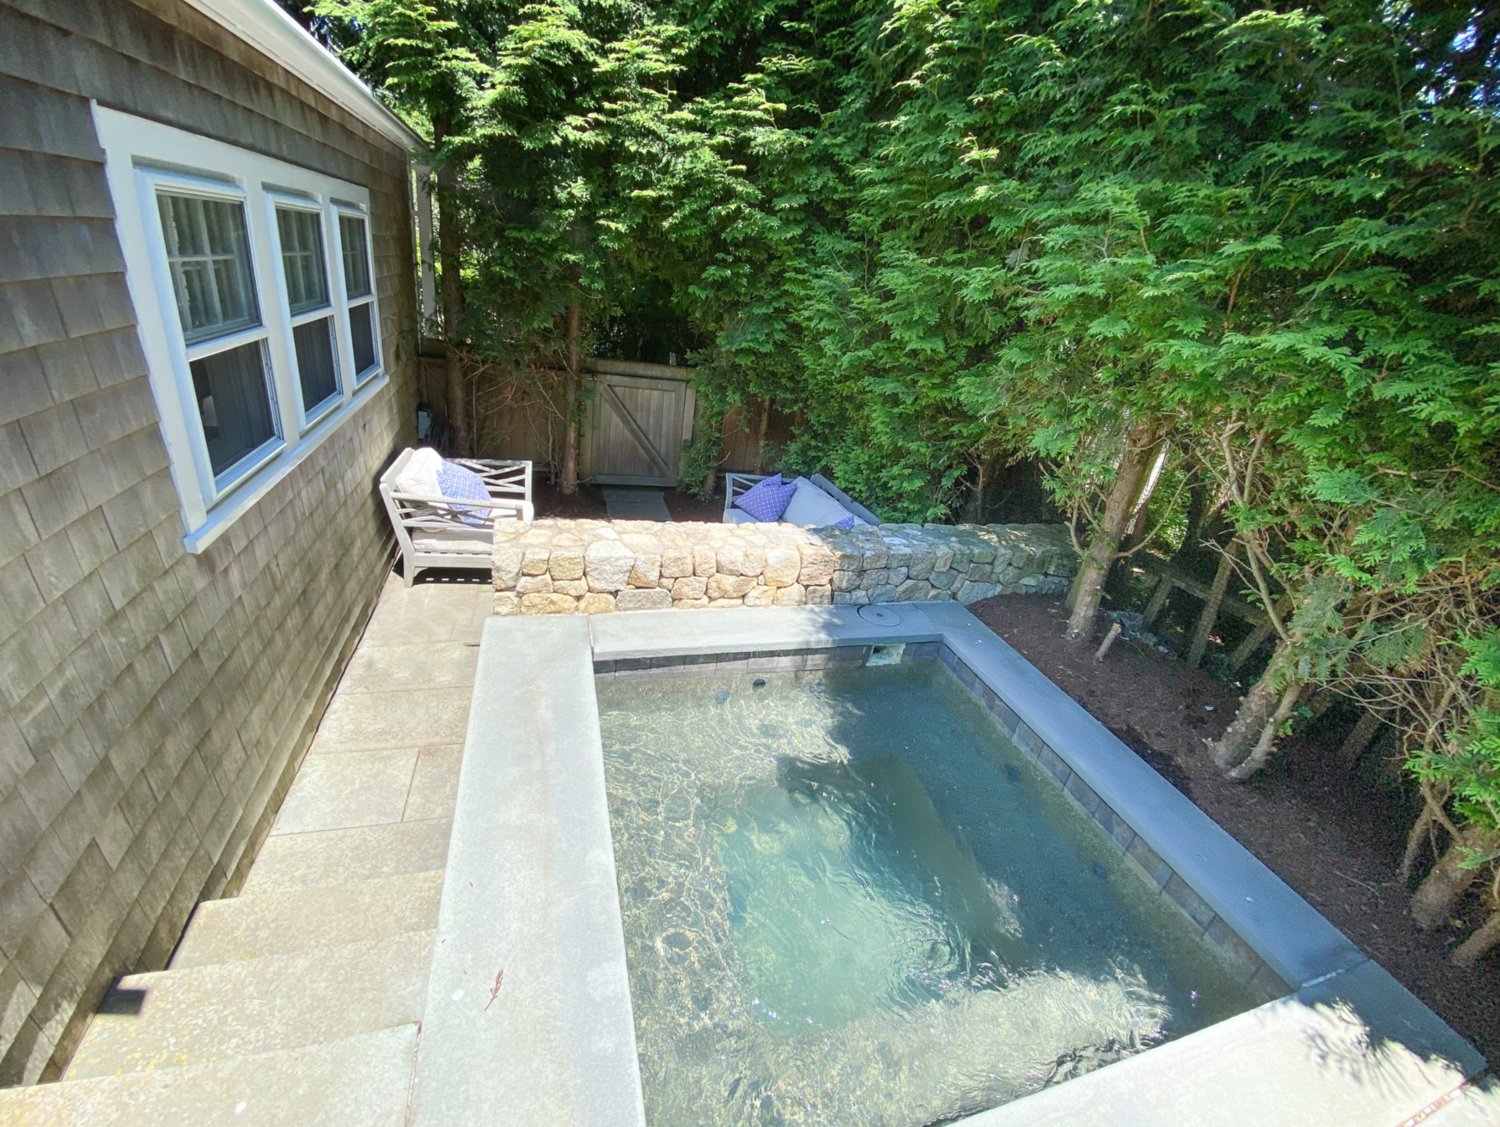 Also outdoors is an in-ground hot tub with a stone surround.